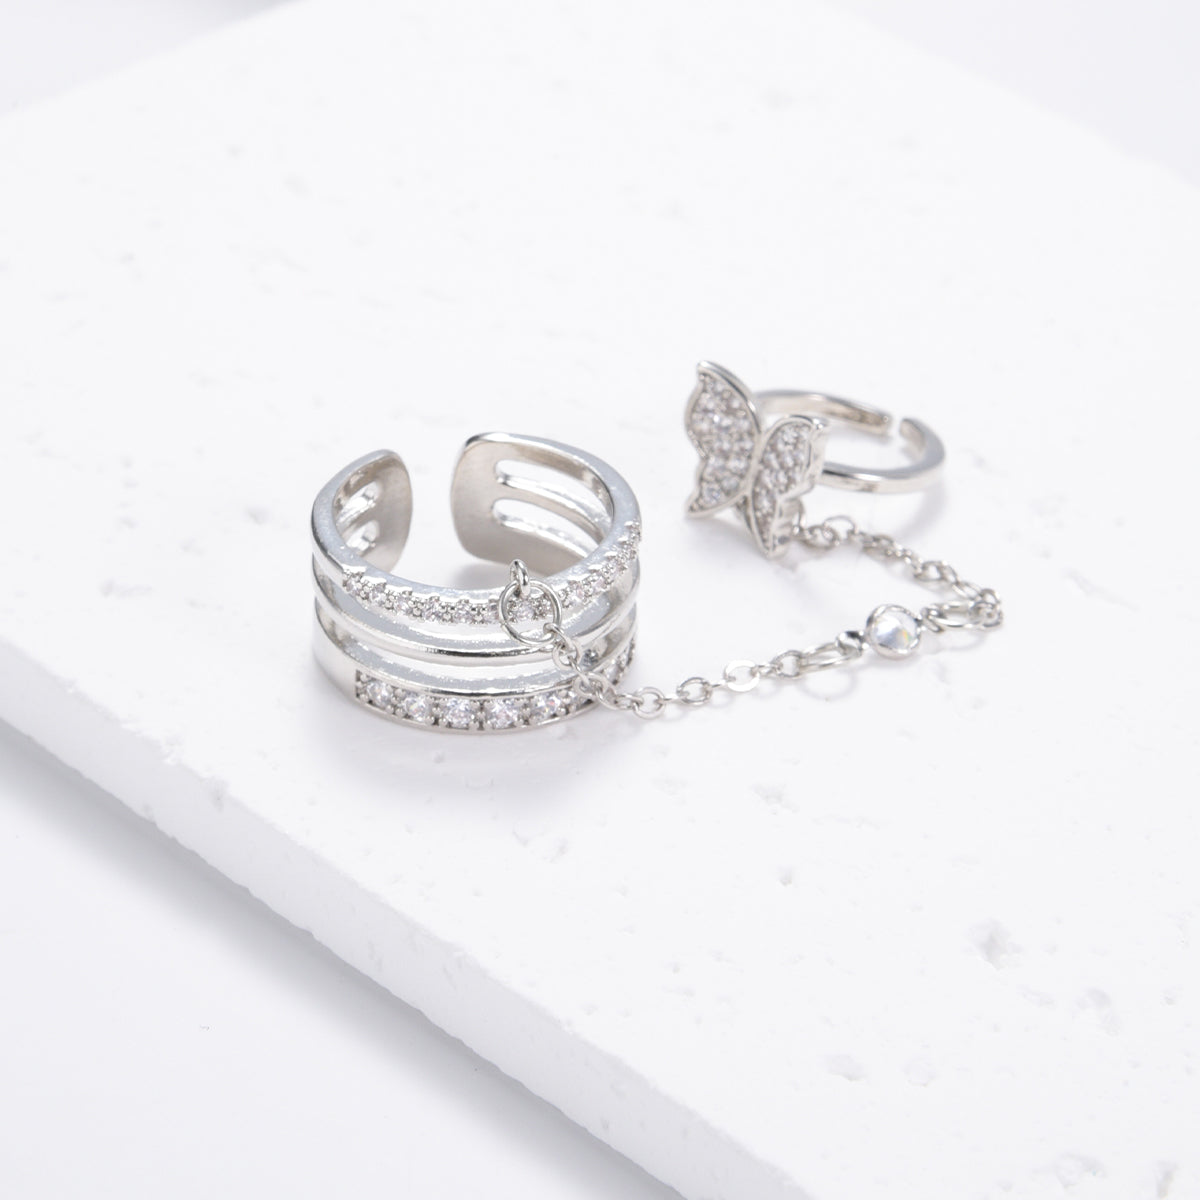 Butterfly two-piece ring in silver covered with elegant white stones